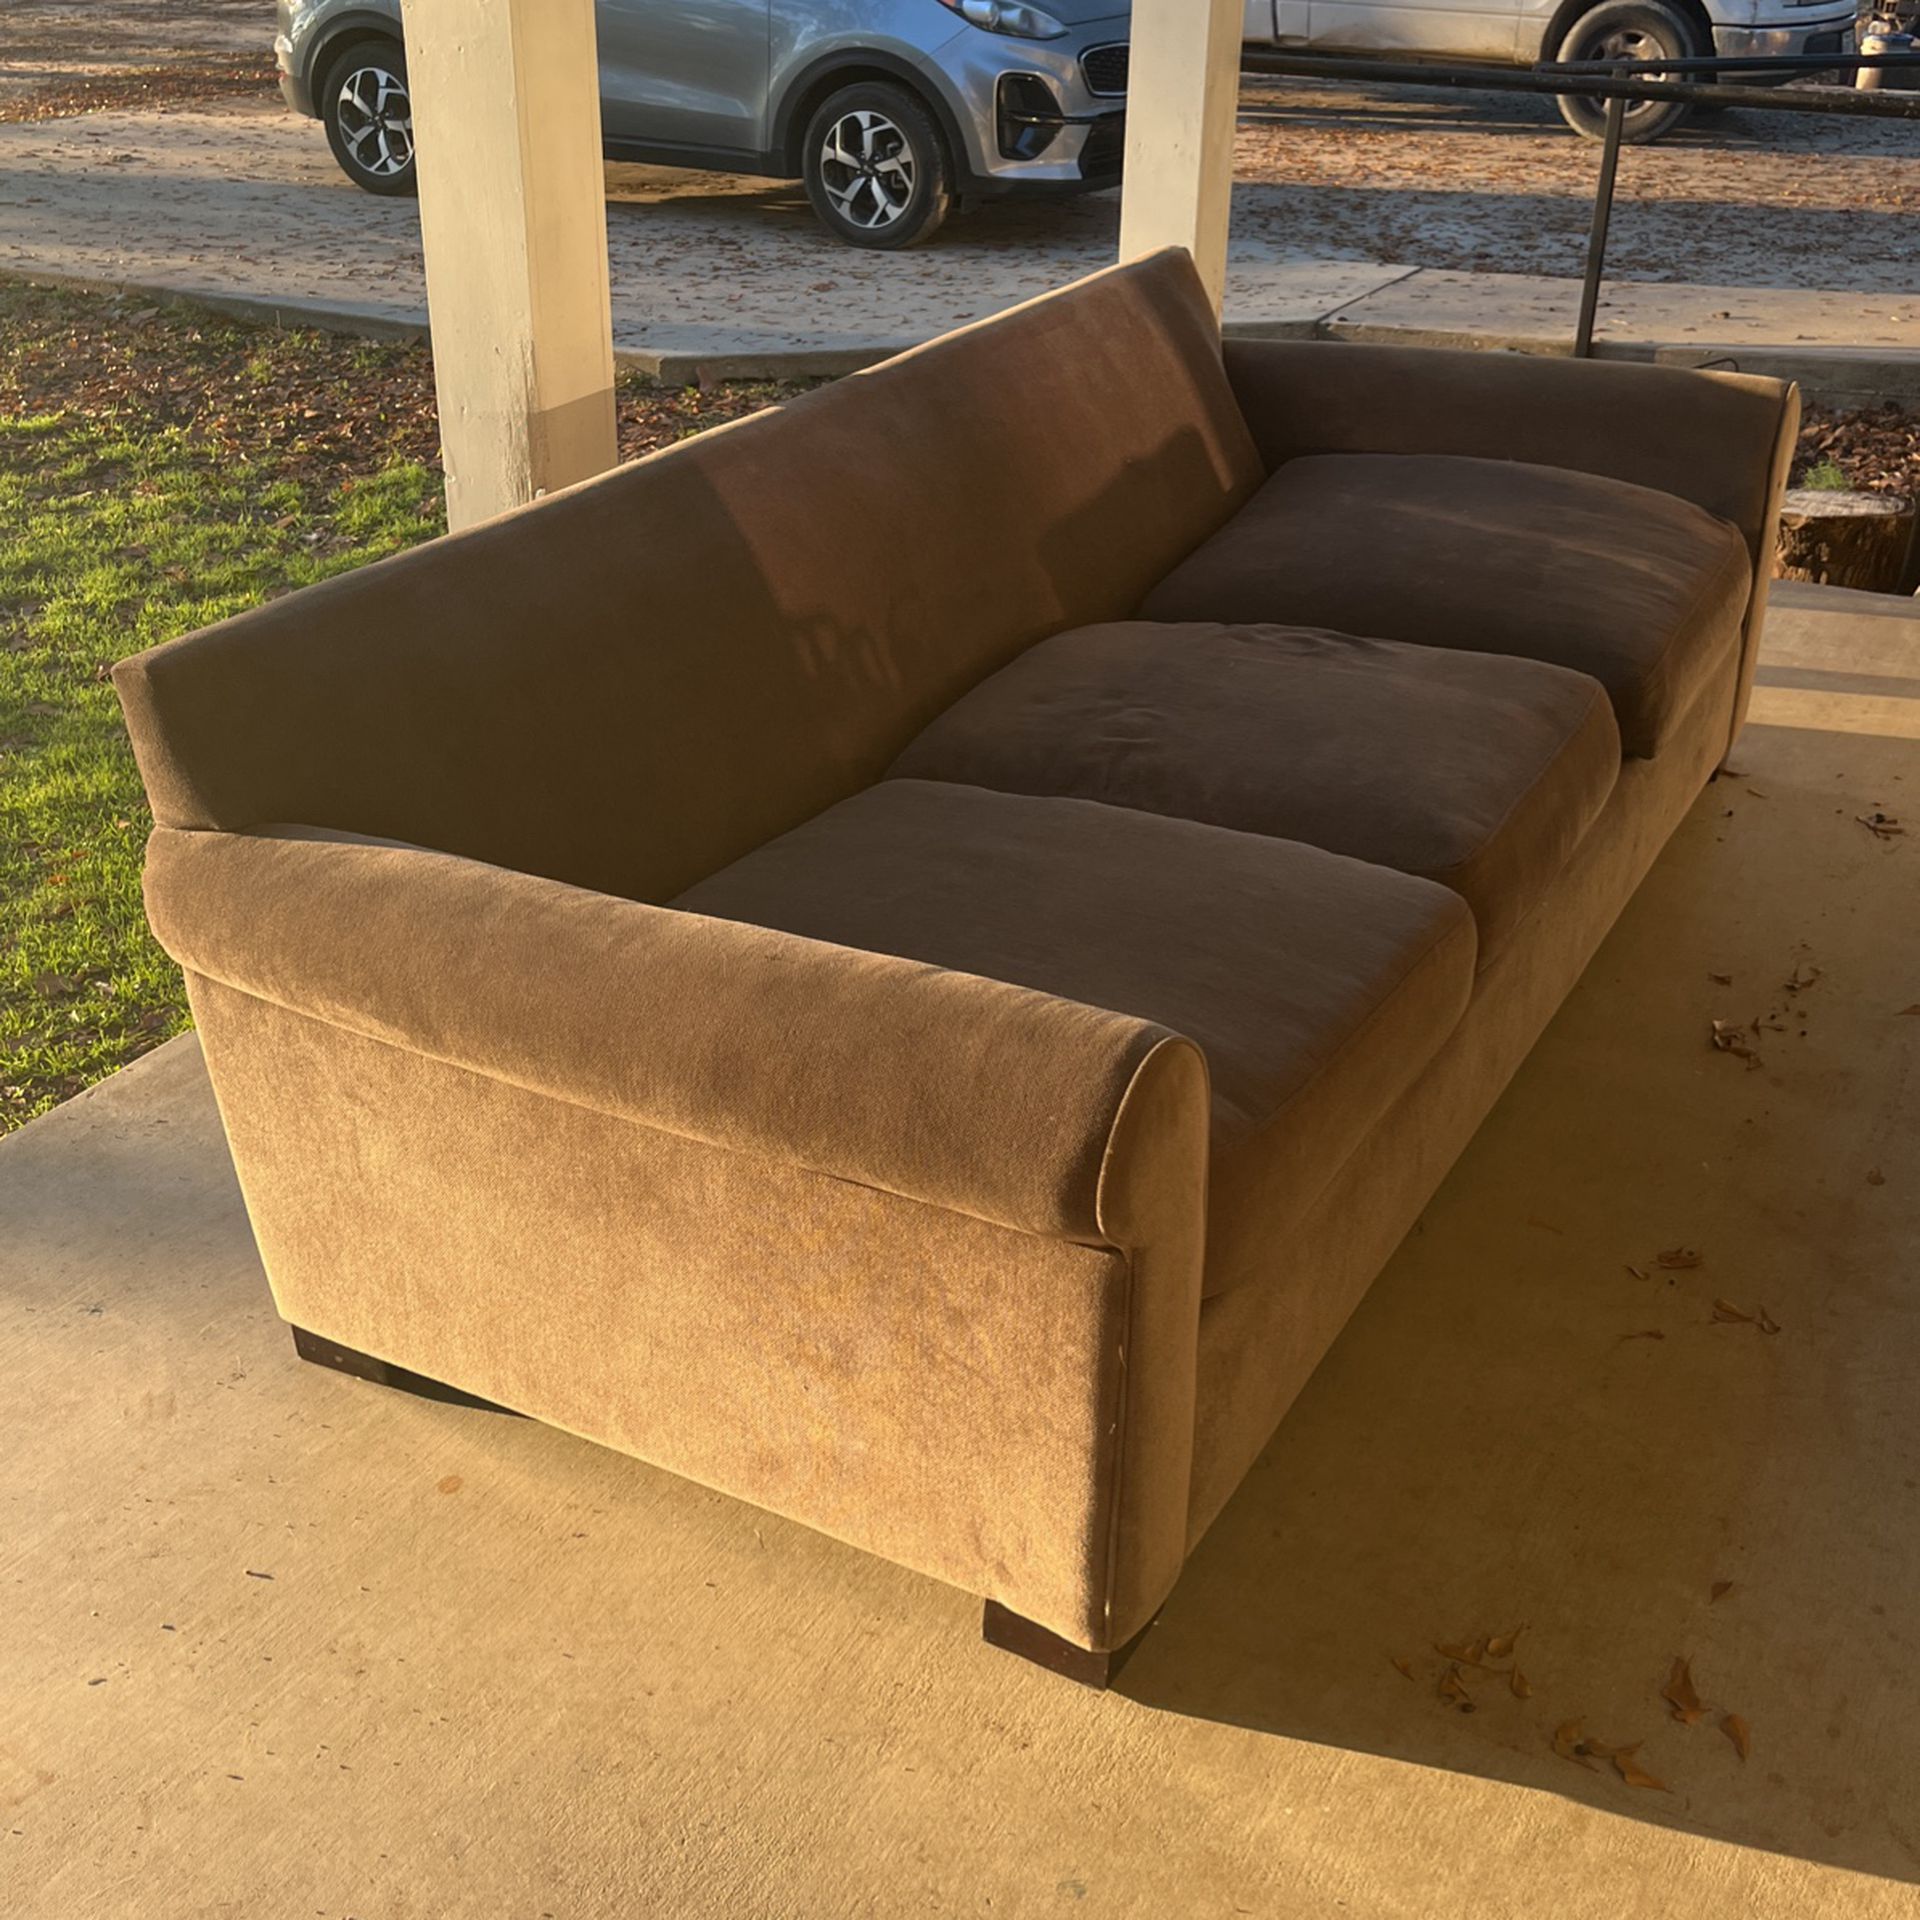 Very Clean And Comfortable Large Couch